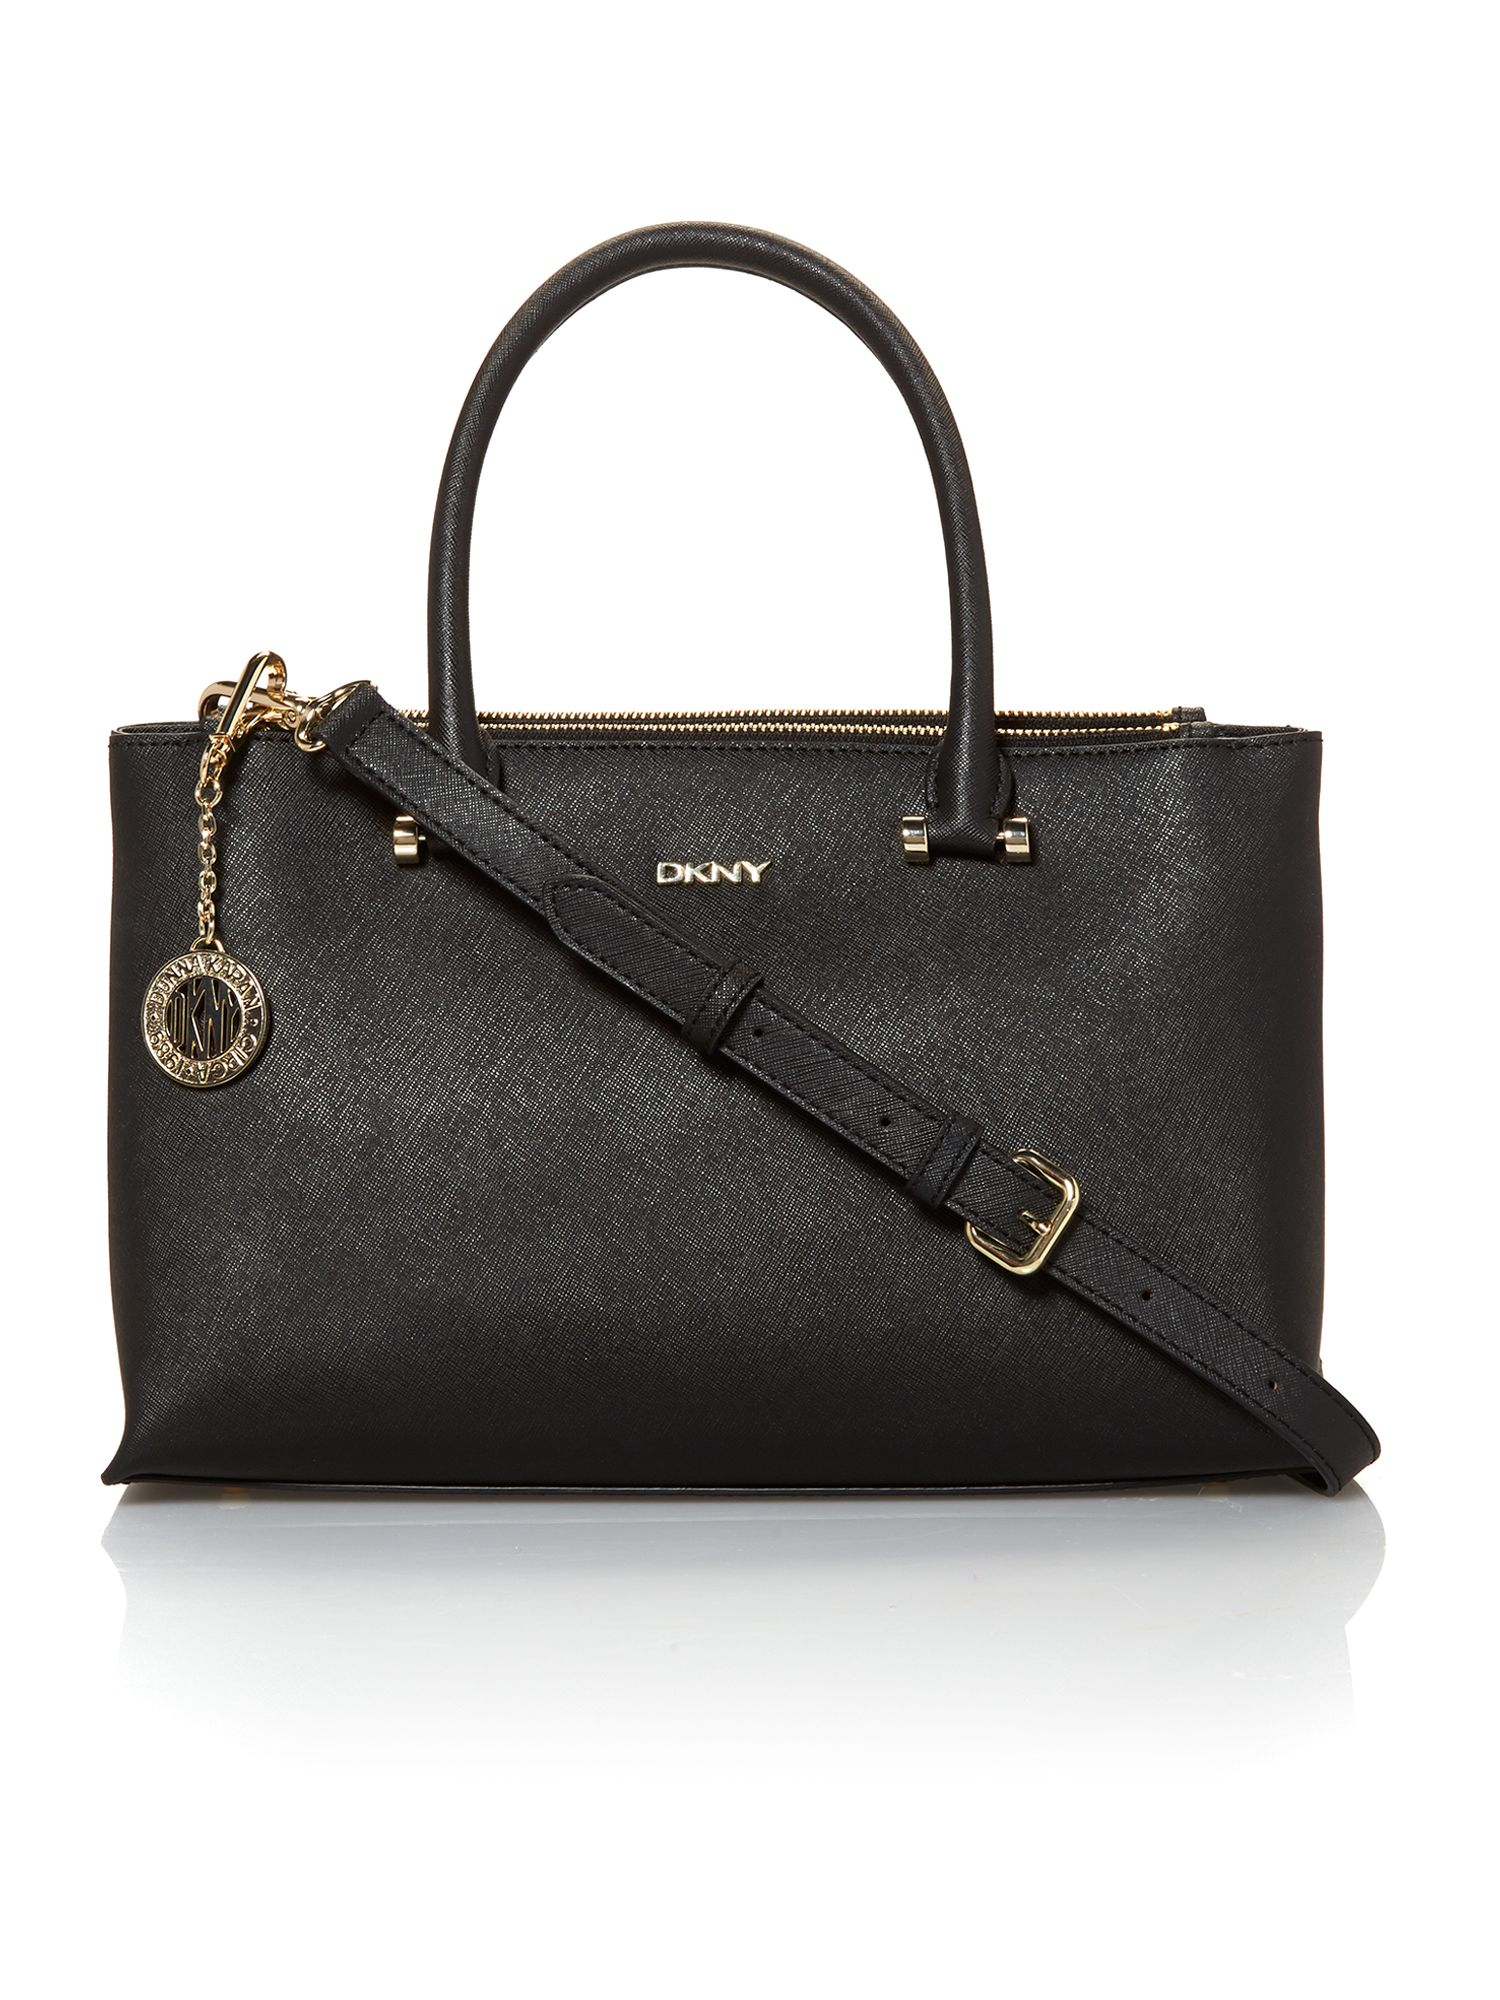 Dkny Saffiano Black Small Double Zip Tote Bag in Black | Lyst